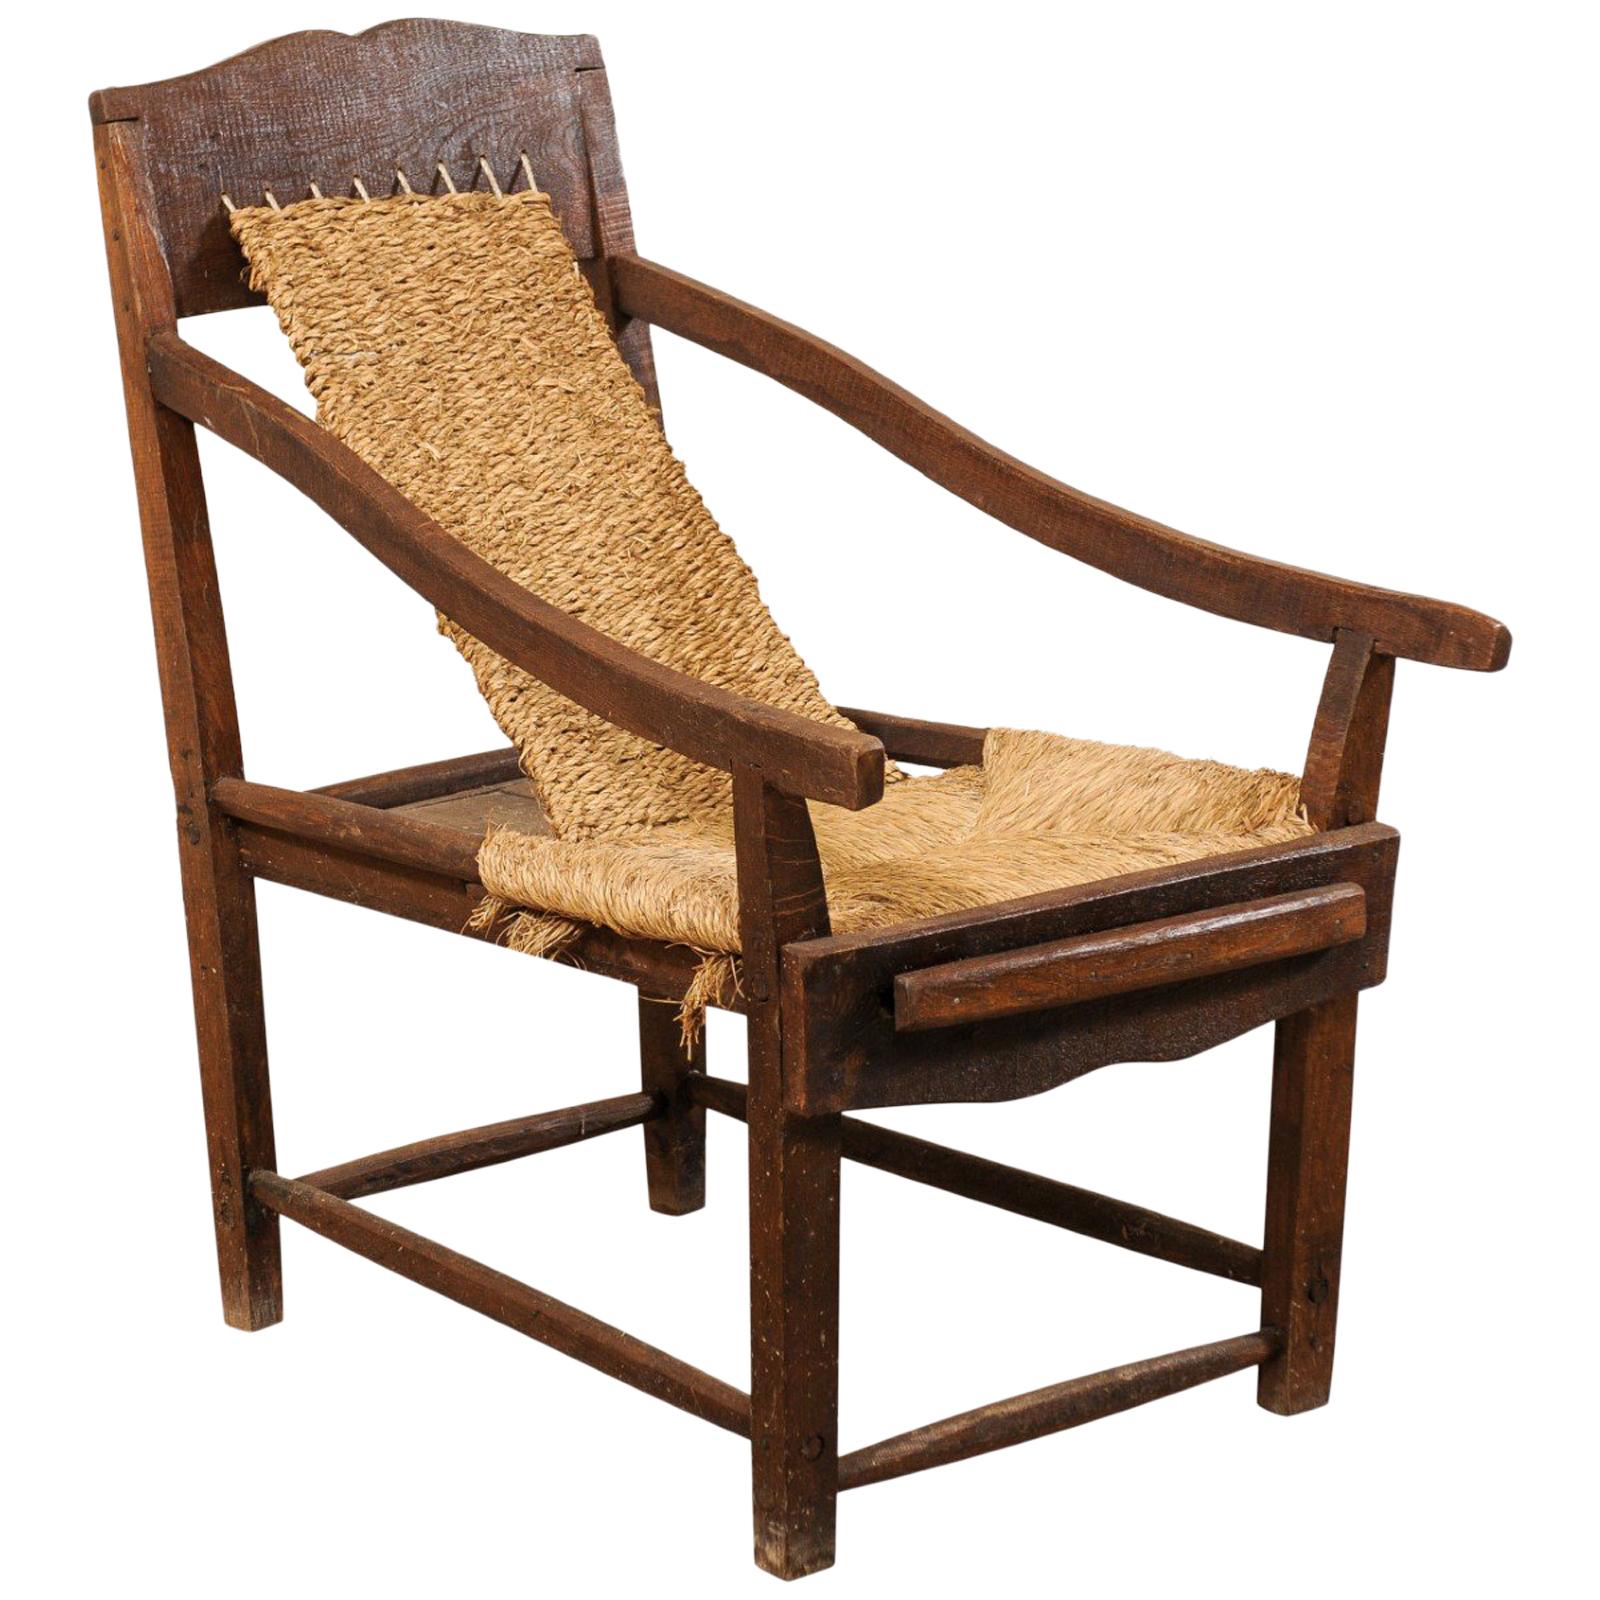 Italian Sling Lounge Chair w/ Rush Seating & Extendable Foot-Rest, Early 20th C.